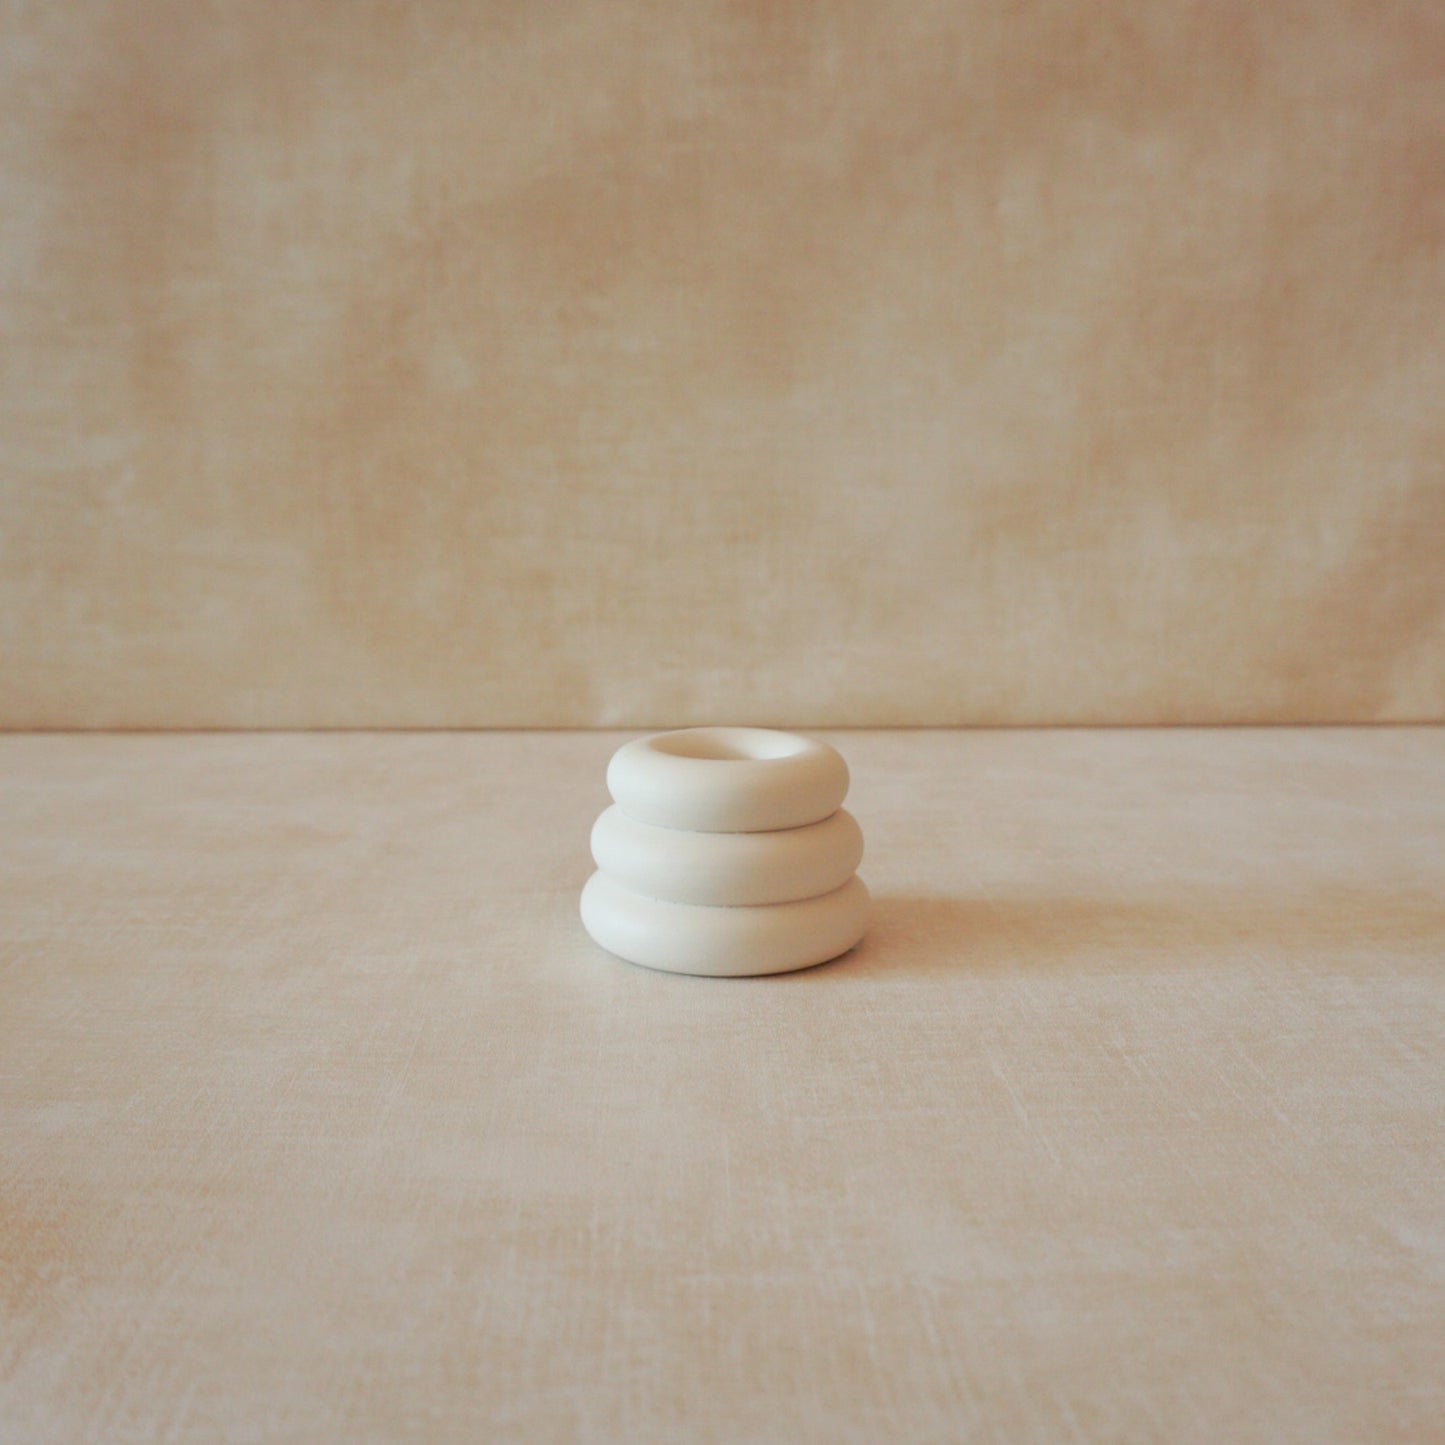 Rings candle holder for tapered candles with simple and versatile design